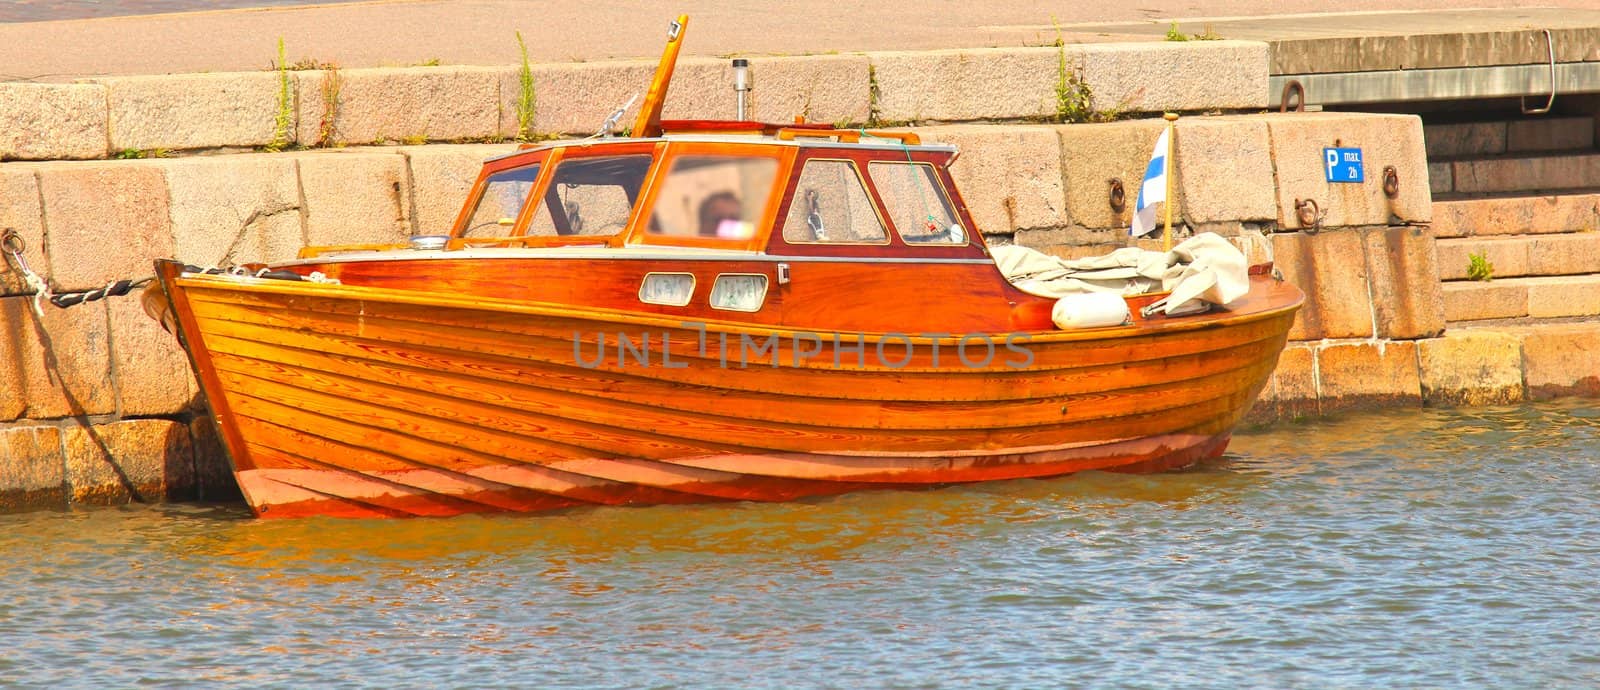 Shiny wooden boat, mooring in water at harbor by Arvebettum